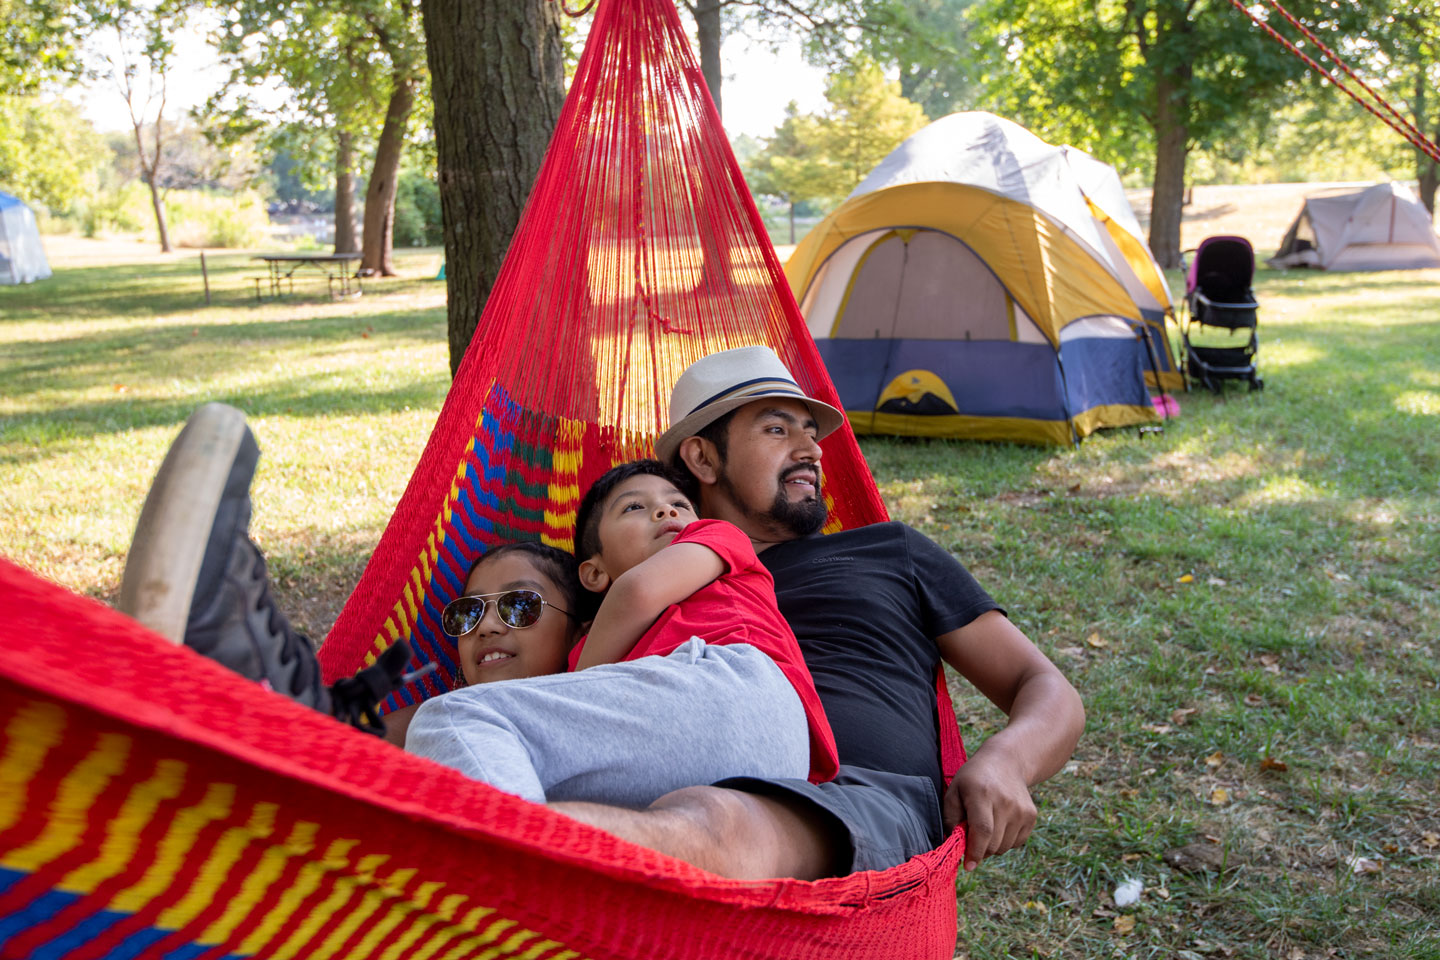 A man and two children lay in a red hammock at a campground.